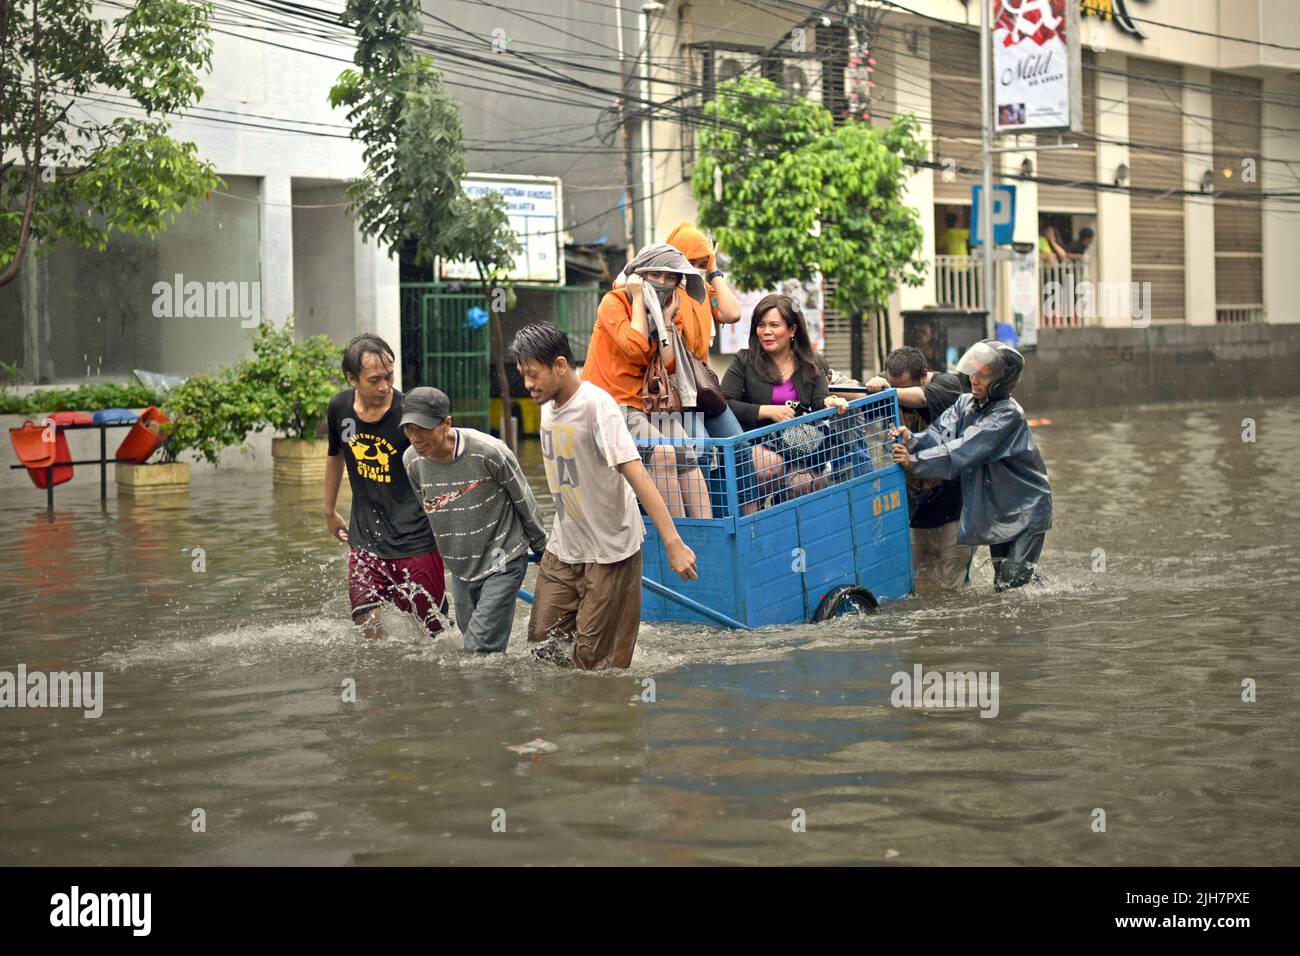 Men helping women to travel through a flooded street by a cart in Jakarta, after a continuous rain left the downtown area of the Indonesian capital city flooded. Stock Photo